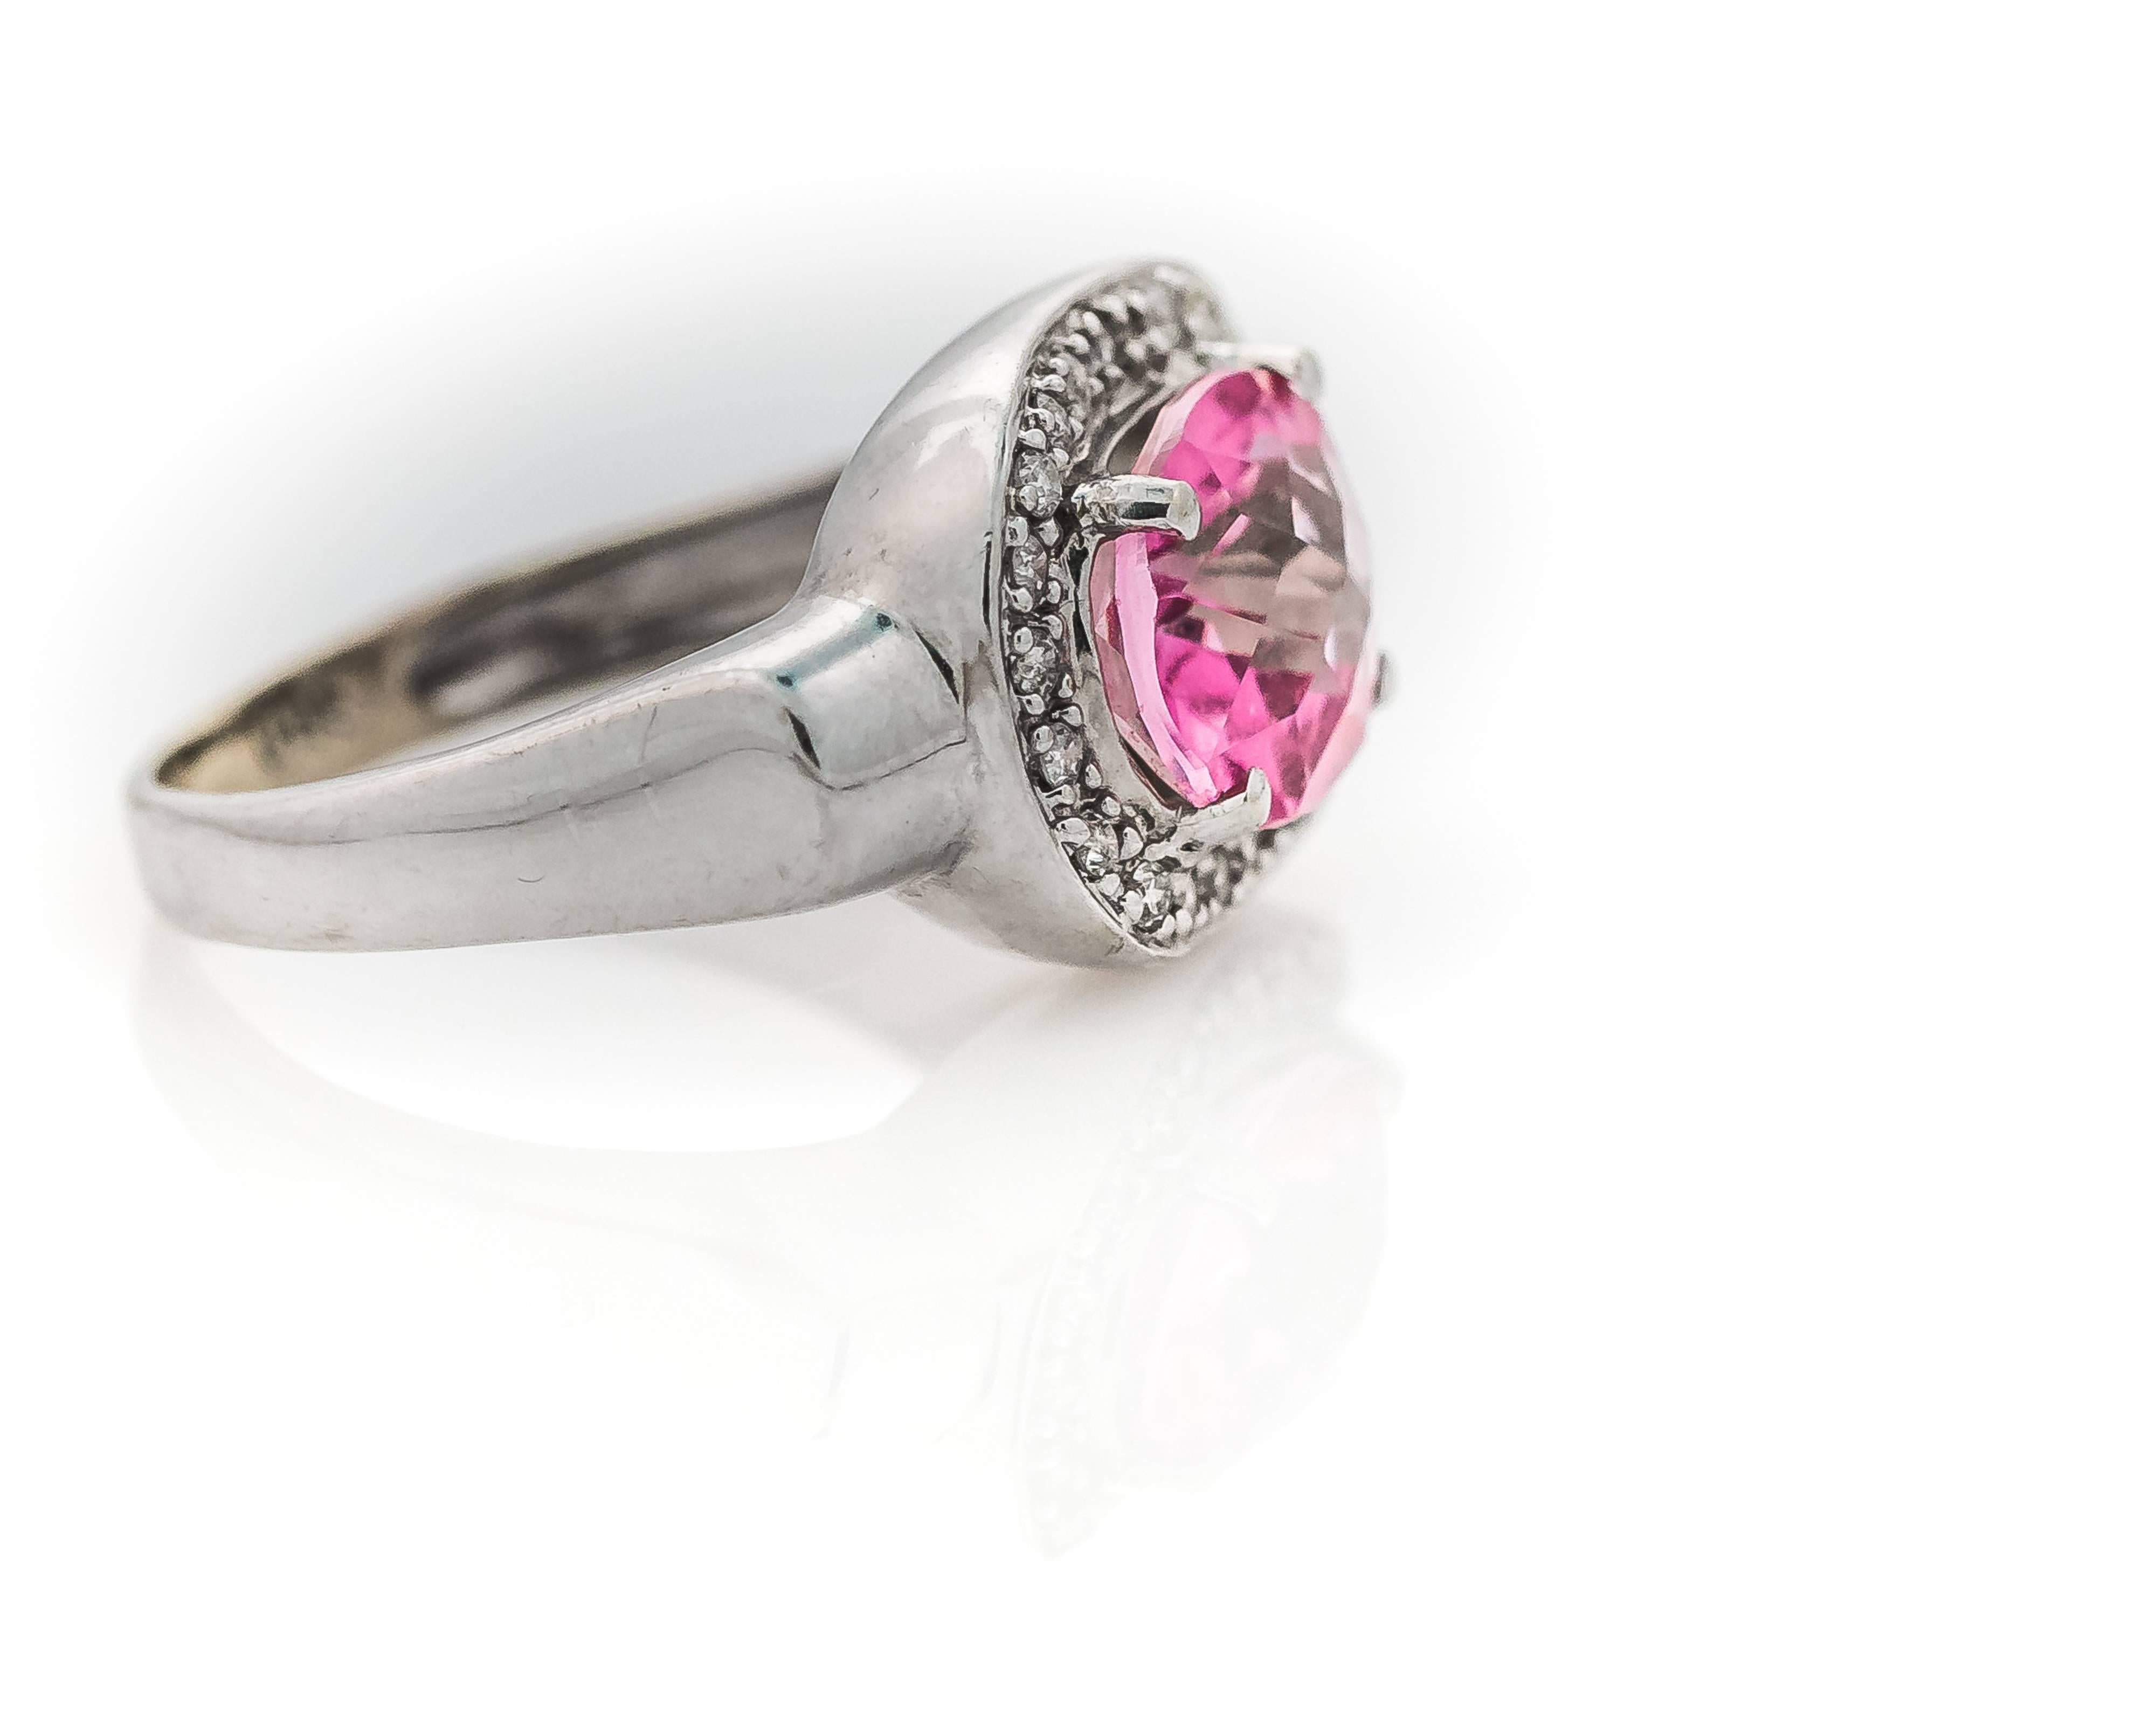 You'll love this angelic 1980s 3 carat Pink Topaz and Diamond Halo 14 karat white gold cocktail Ring. 

Diamonds featured here weigh 0.25 carats total weight, all prong set.
The diamonds surround an oval prong set Pink Topaz weighing a whopping 3